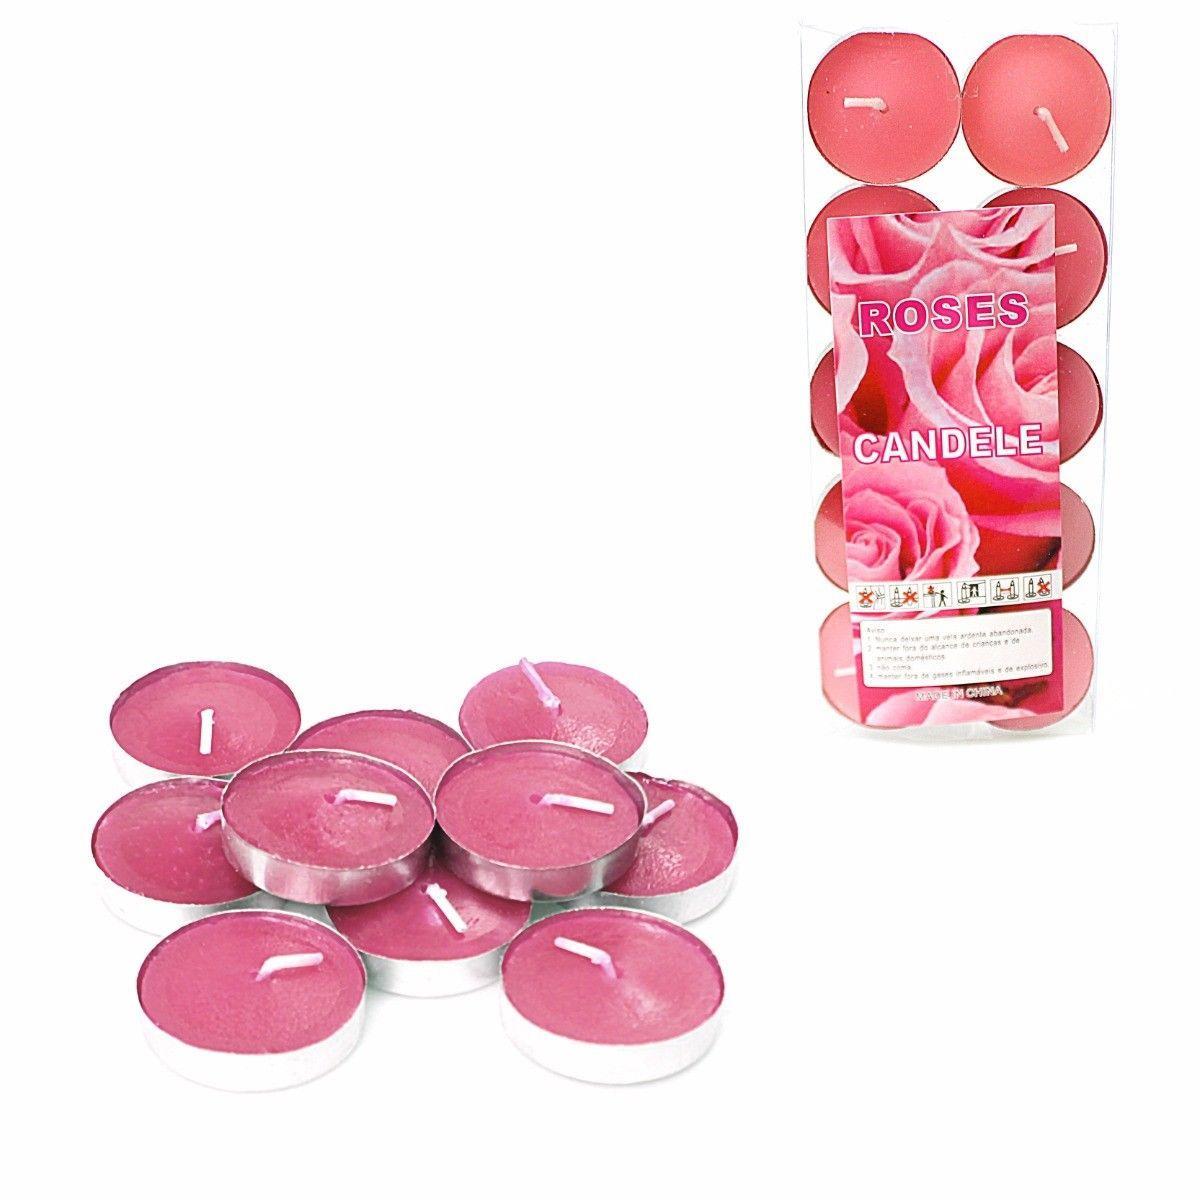 10 Pack Scented Wax Tea Light Candles Assorted Scents 0232 (Large Letter Rate)